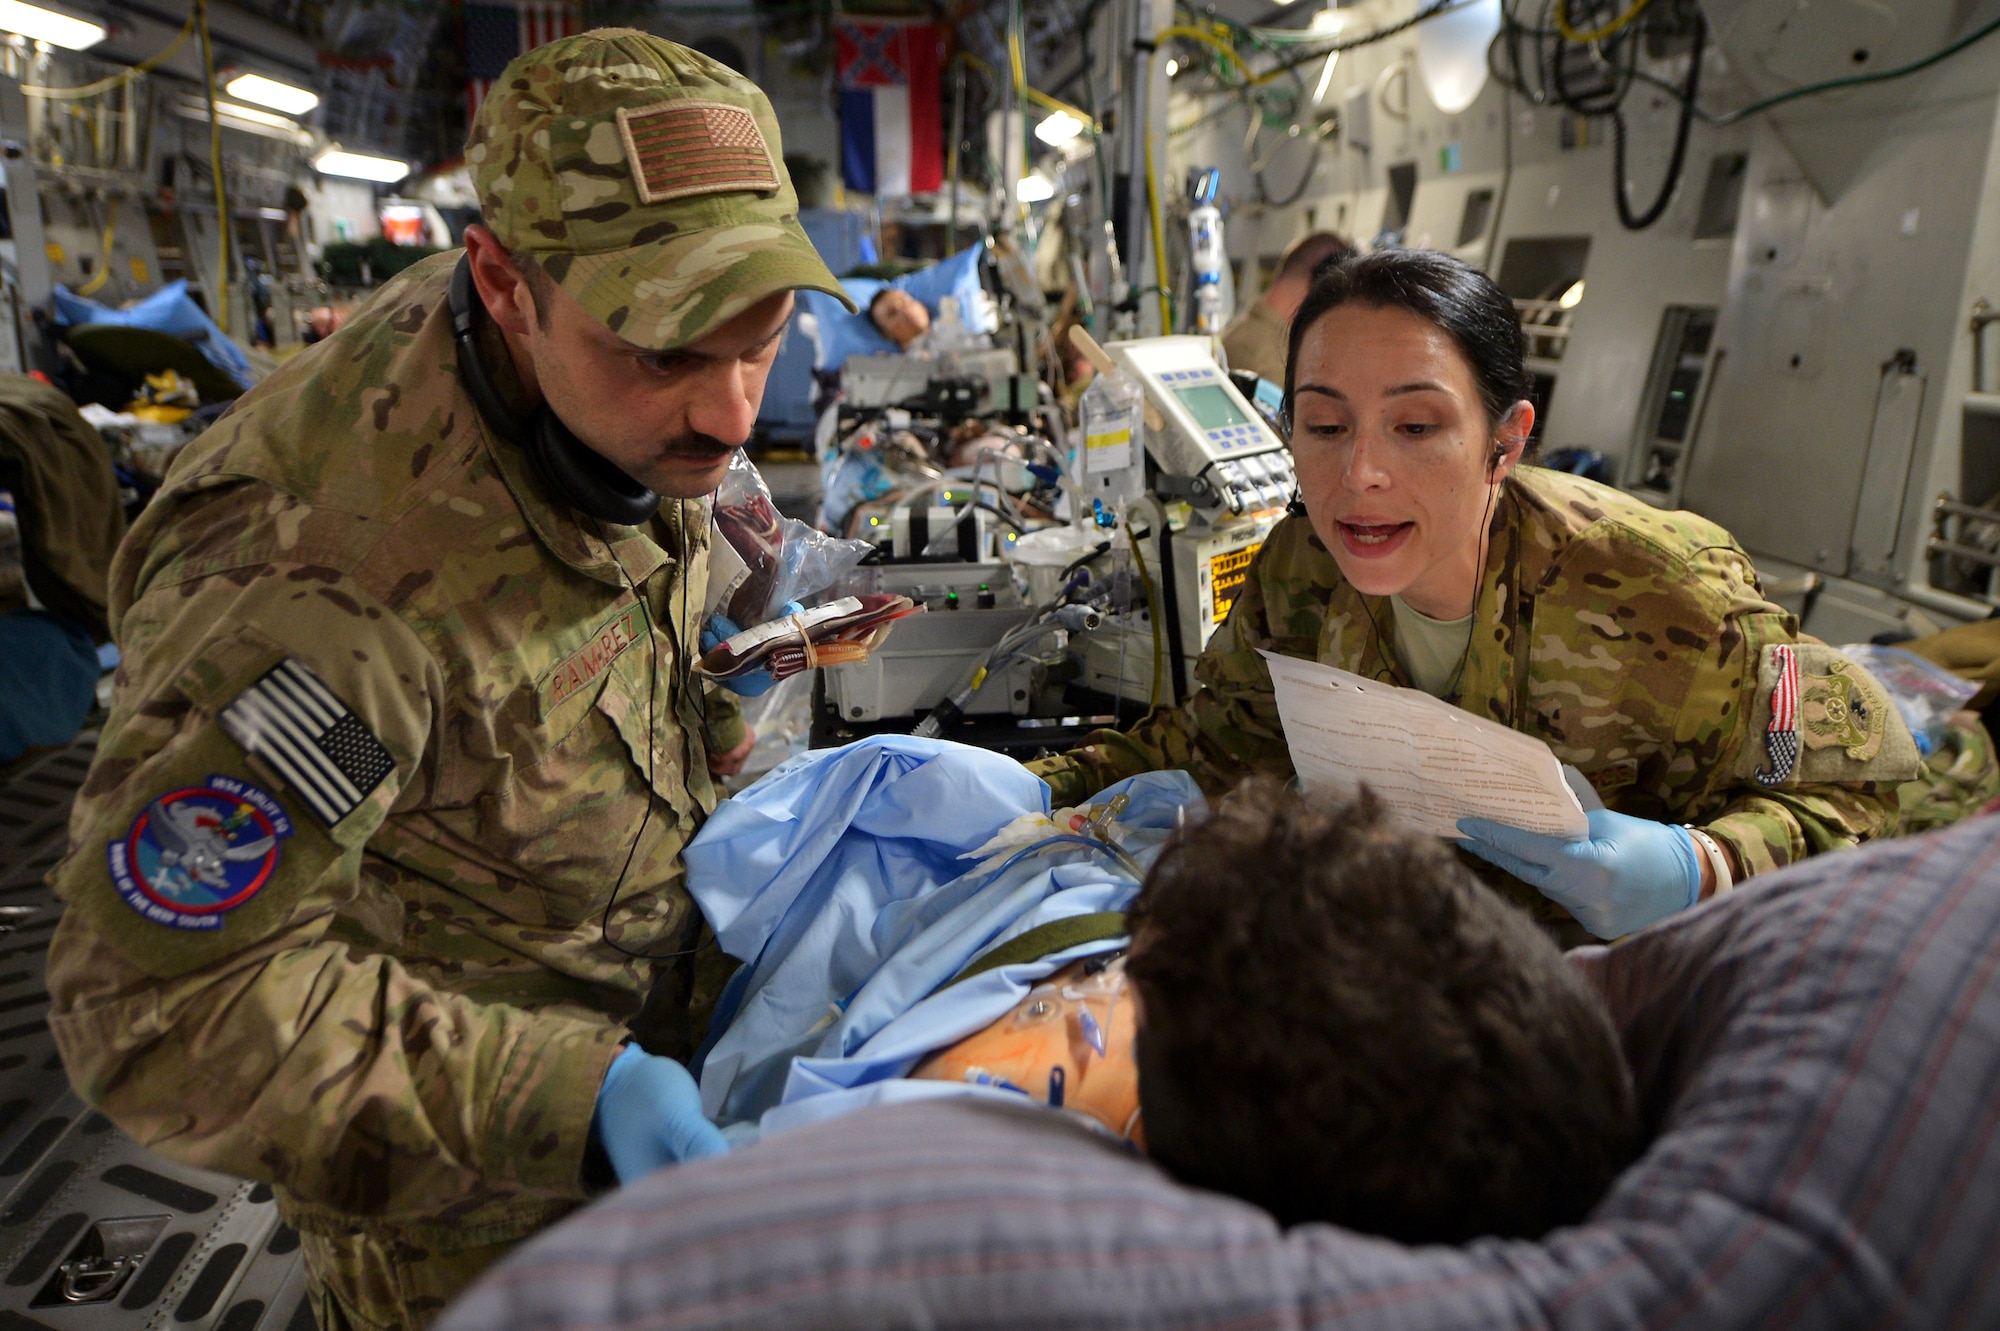 Capt. Mario Ramirez and Capt. Suzanne Morris, members of the 455th Expeditionary Aeromedical Evacuation Squadron Critical Care Air Transport Team, confirm a patient's identity and prepare to administer a blood transfusion during a flight out of Bagram Airfield, Afghanistan, March 21, 2013. A CCATT crew consists of a physician, intensive care nurse and a respiratory therapist, making it possible to move severely injured or gravely ill servicemembers by air.  (U.S. Air Force photo/Senior Airman Chris Willis)